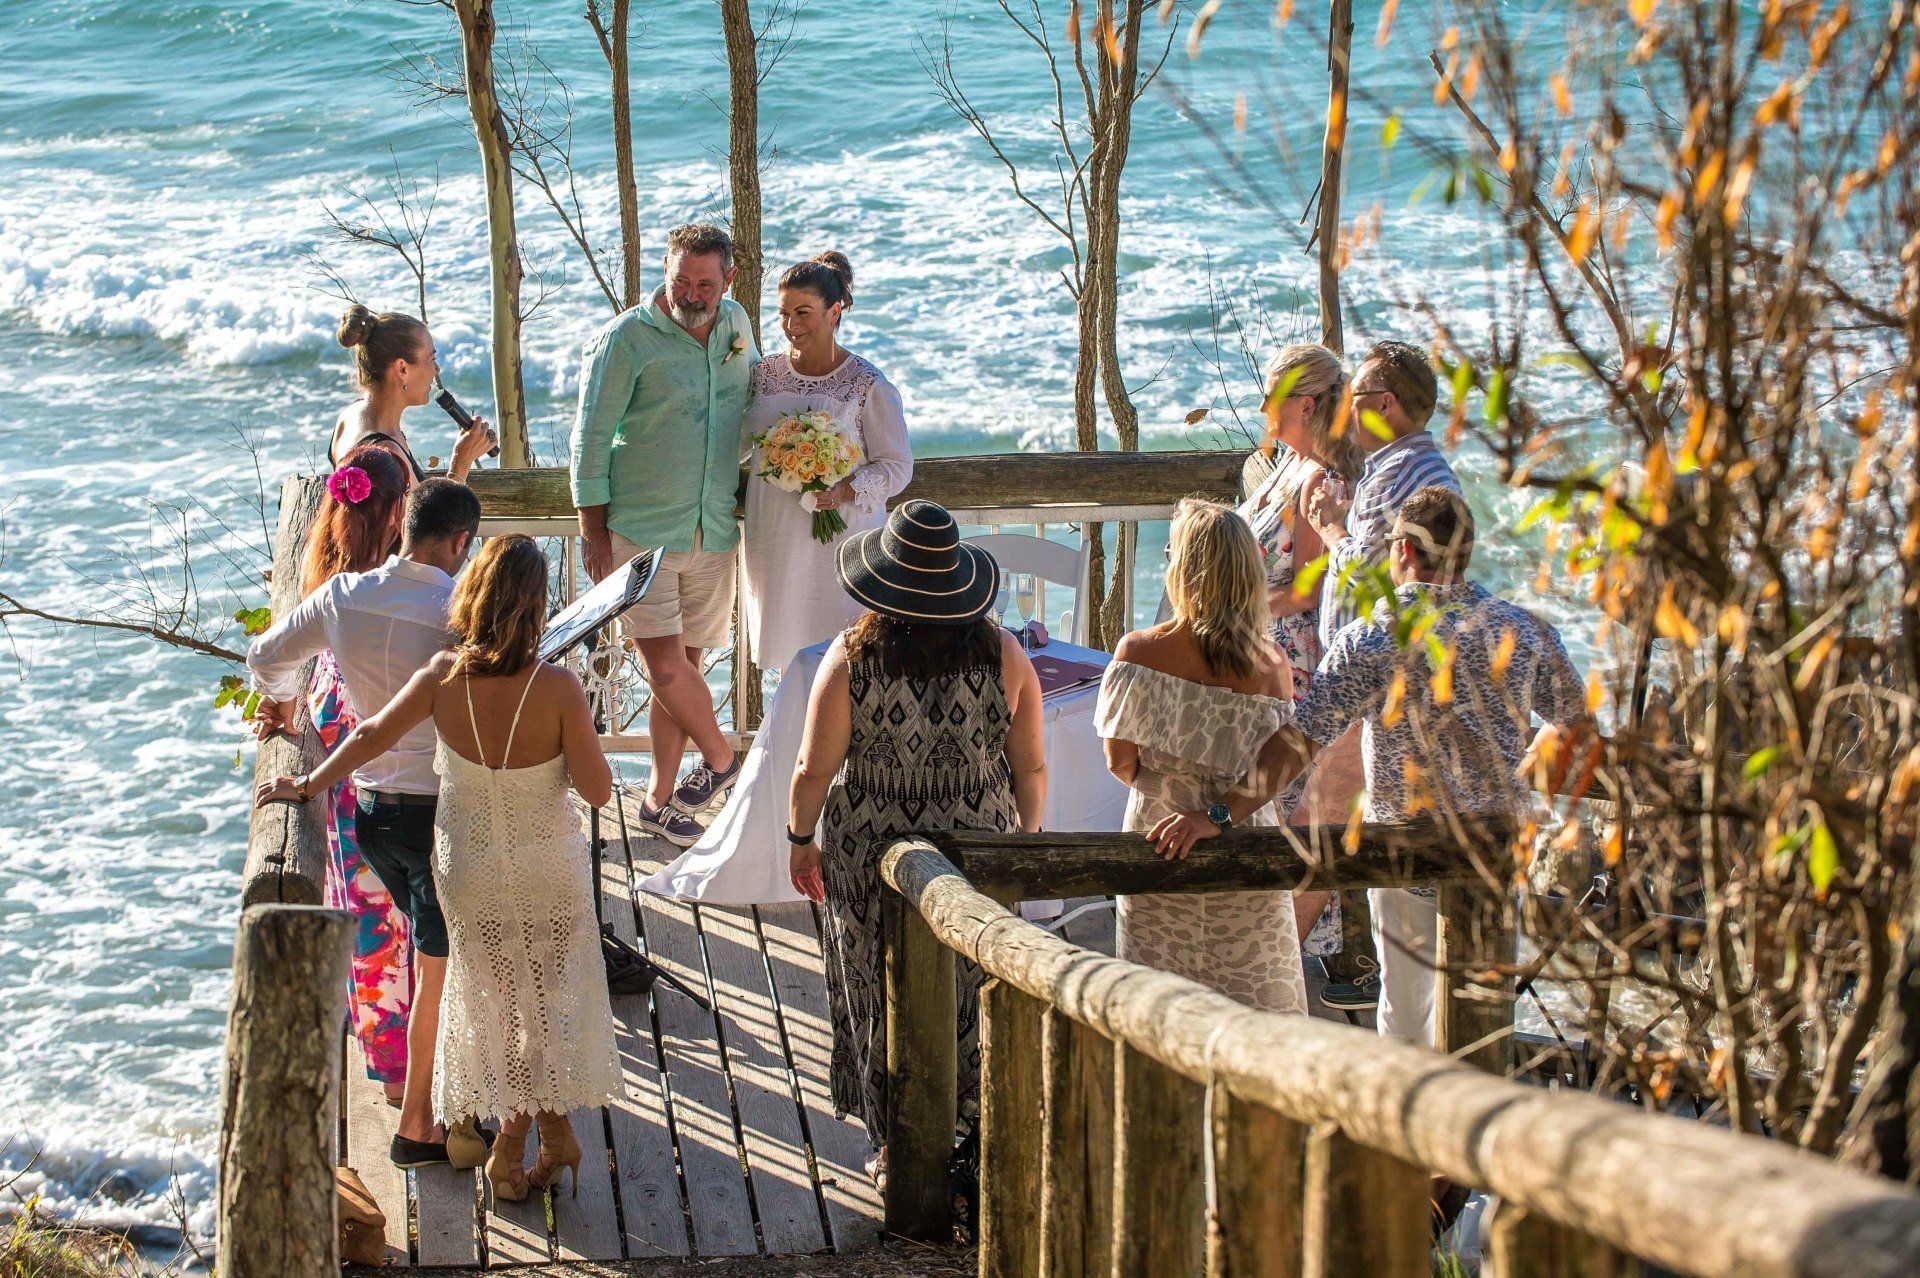 elopement with 10 guests at Noosa Little Cove deck, turquoise ocean and bright sun, celebrant in black marrying the couple